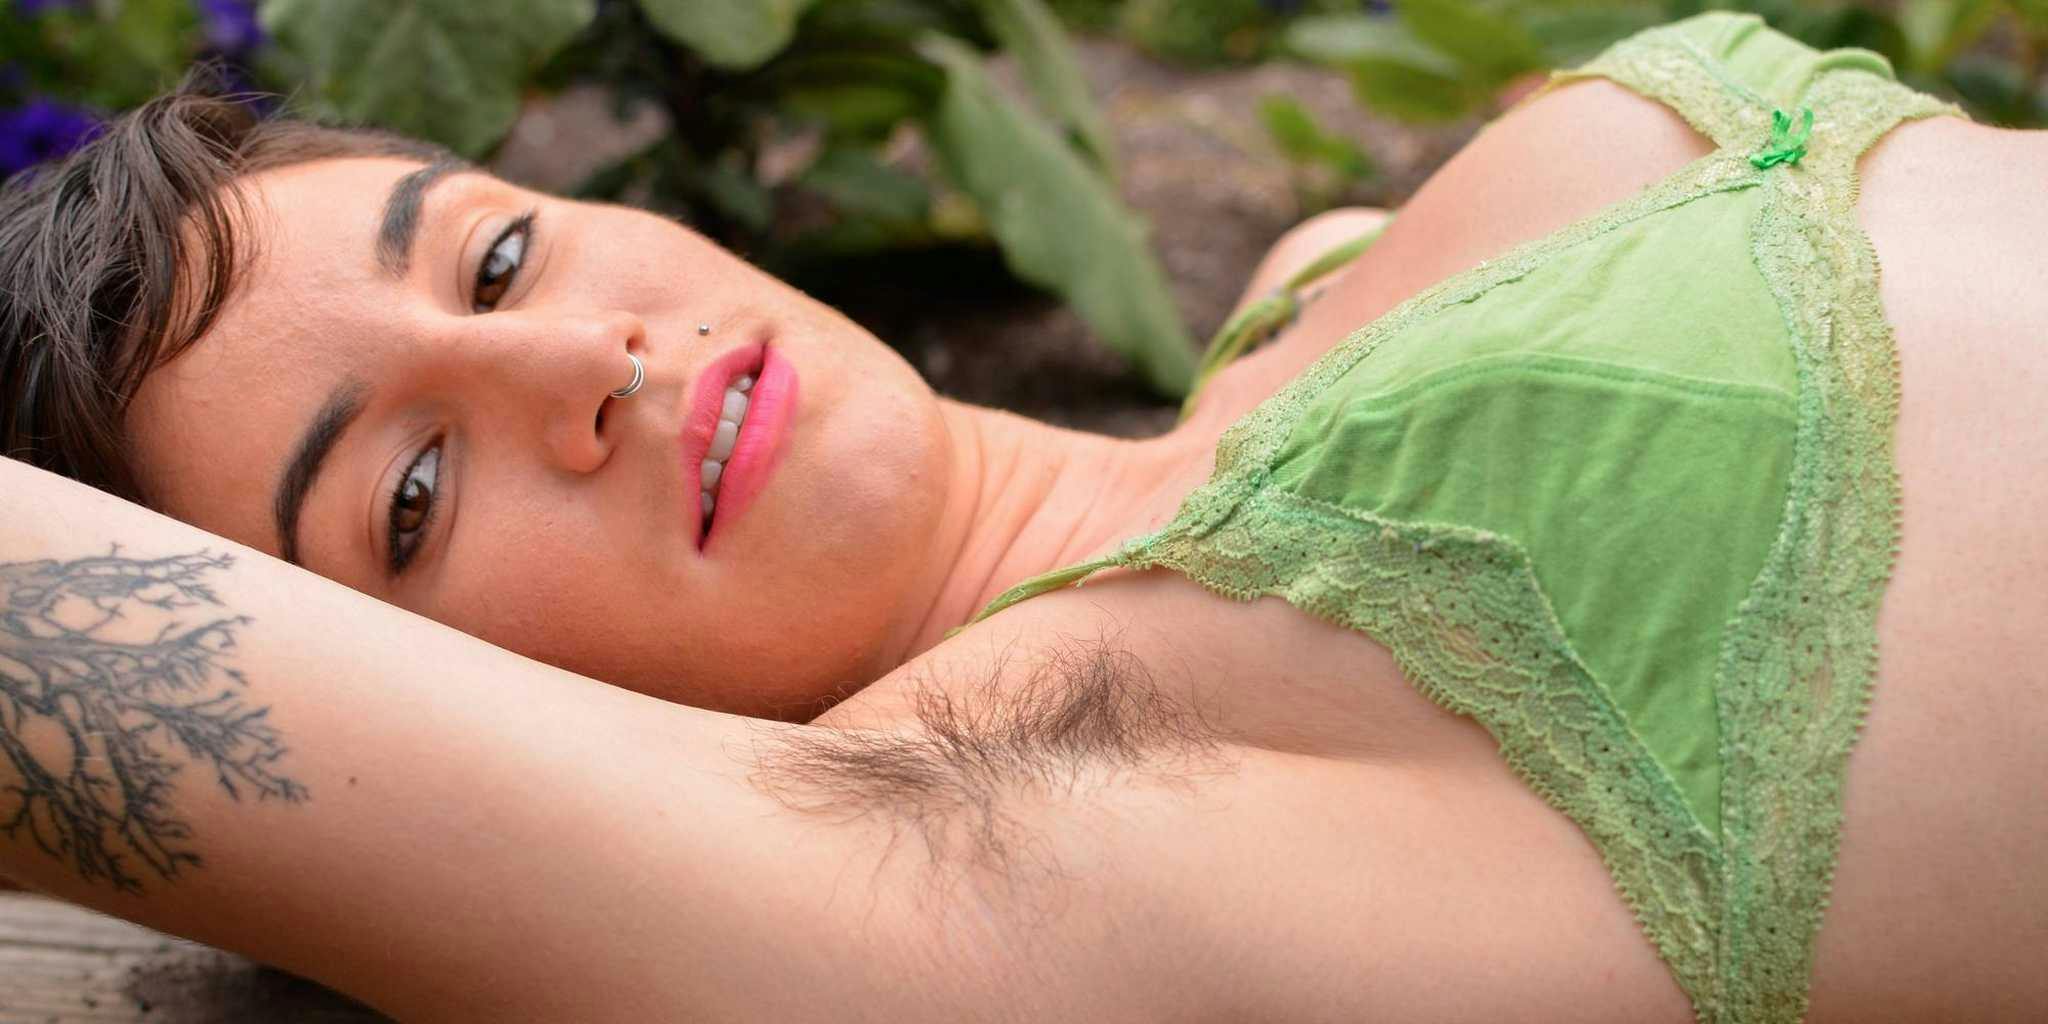 This photographer is bringing back body hair in porn